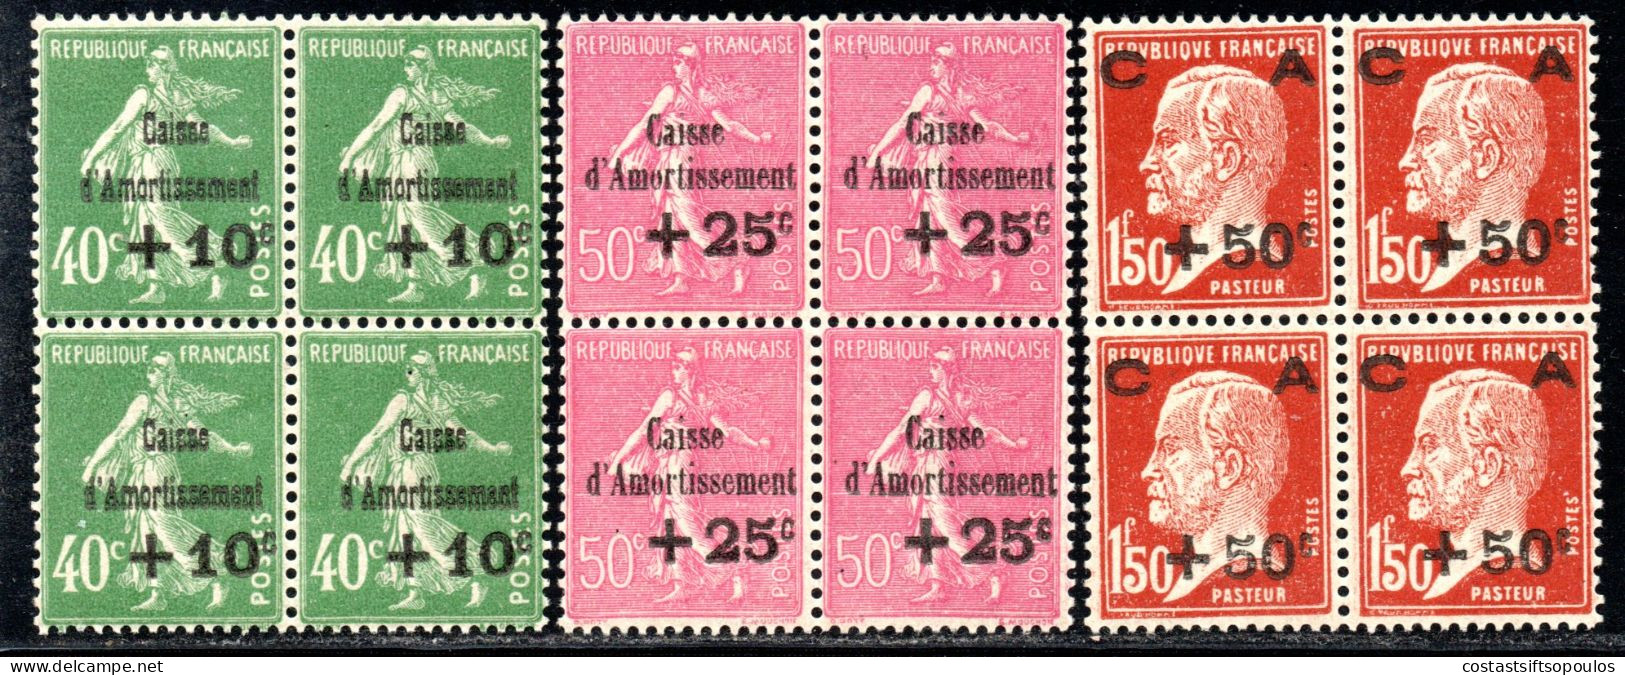 2614.FRANCE 1929 SINKING FUNDS #253-255 MNH BLOCKS OF 4,2-3 INVISIBLE TRACES OF HINGE.SEE VERY LIGHT GUM BLEMISHES - 1927-31 Cassa Di Ammortamento